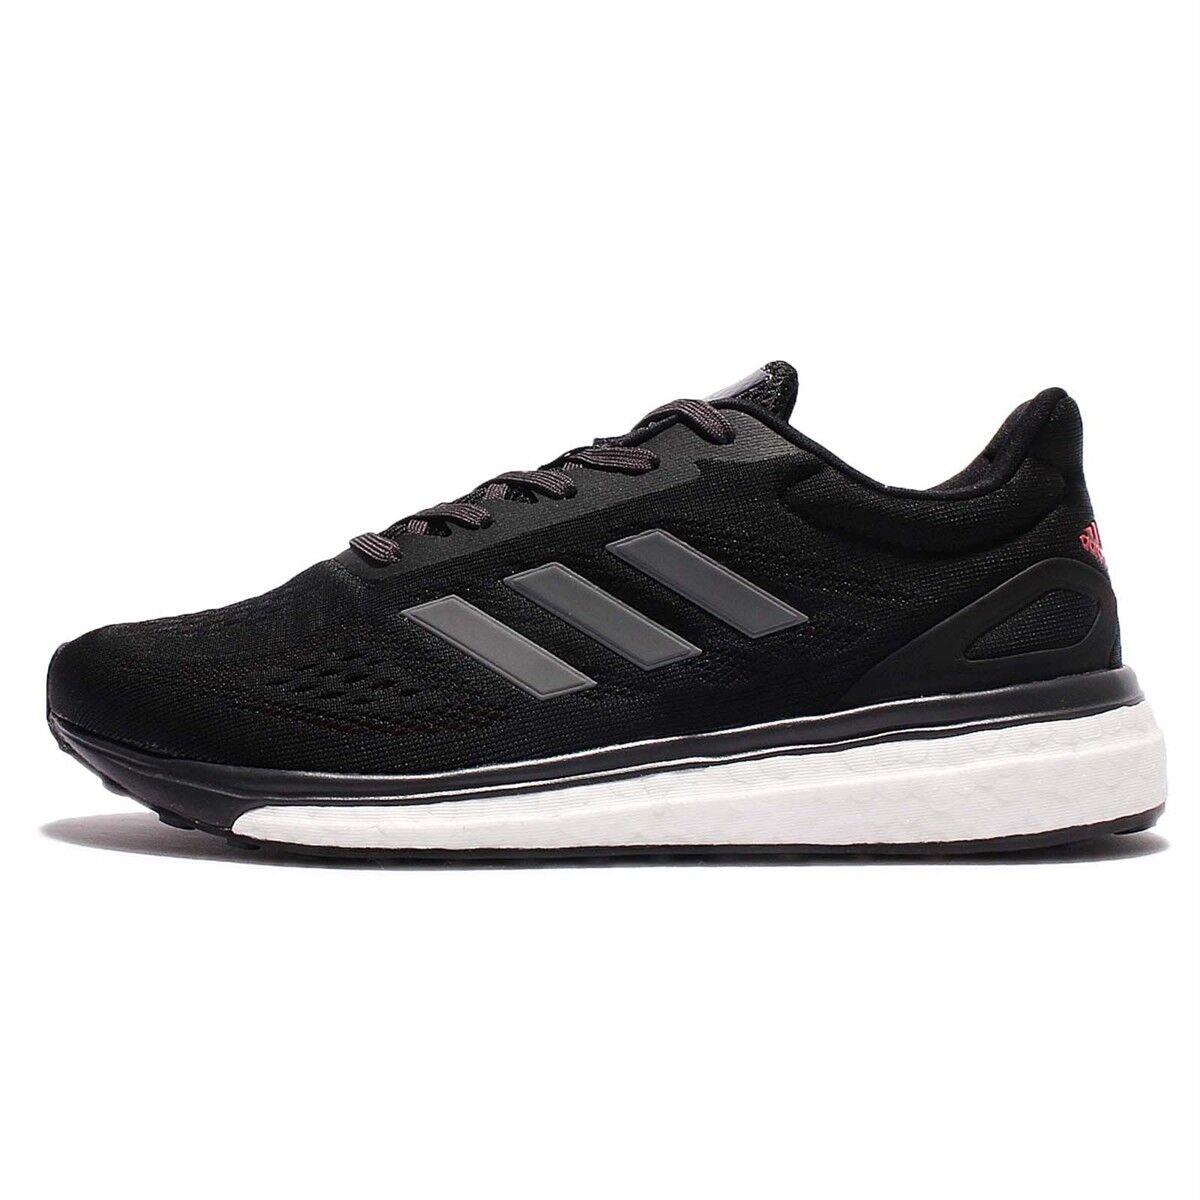 Women Adidas Sonic Drive Boost Running Shoes Adidas Boost Sneakers Black 2